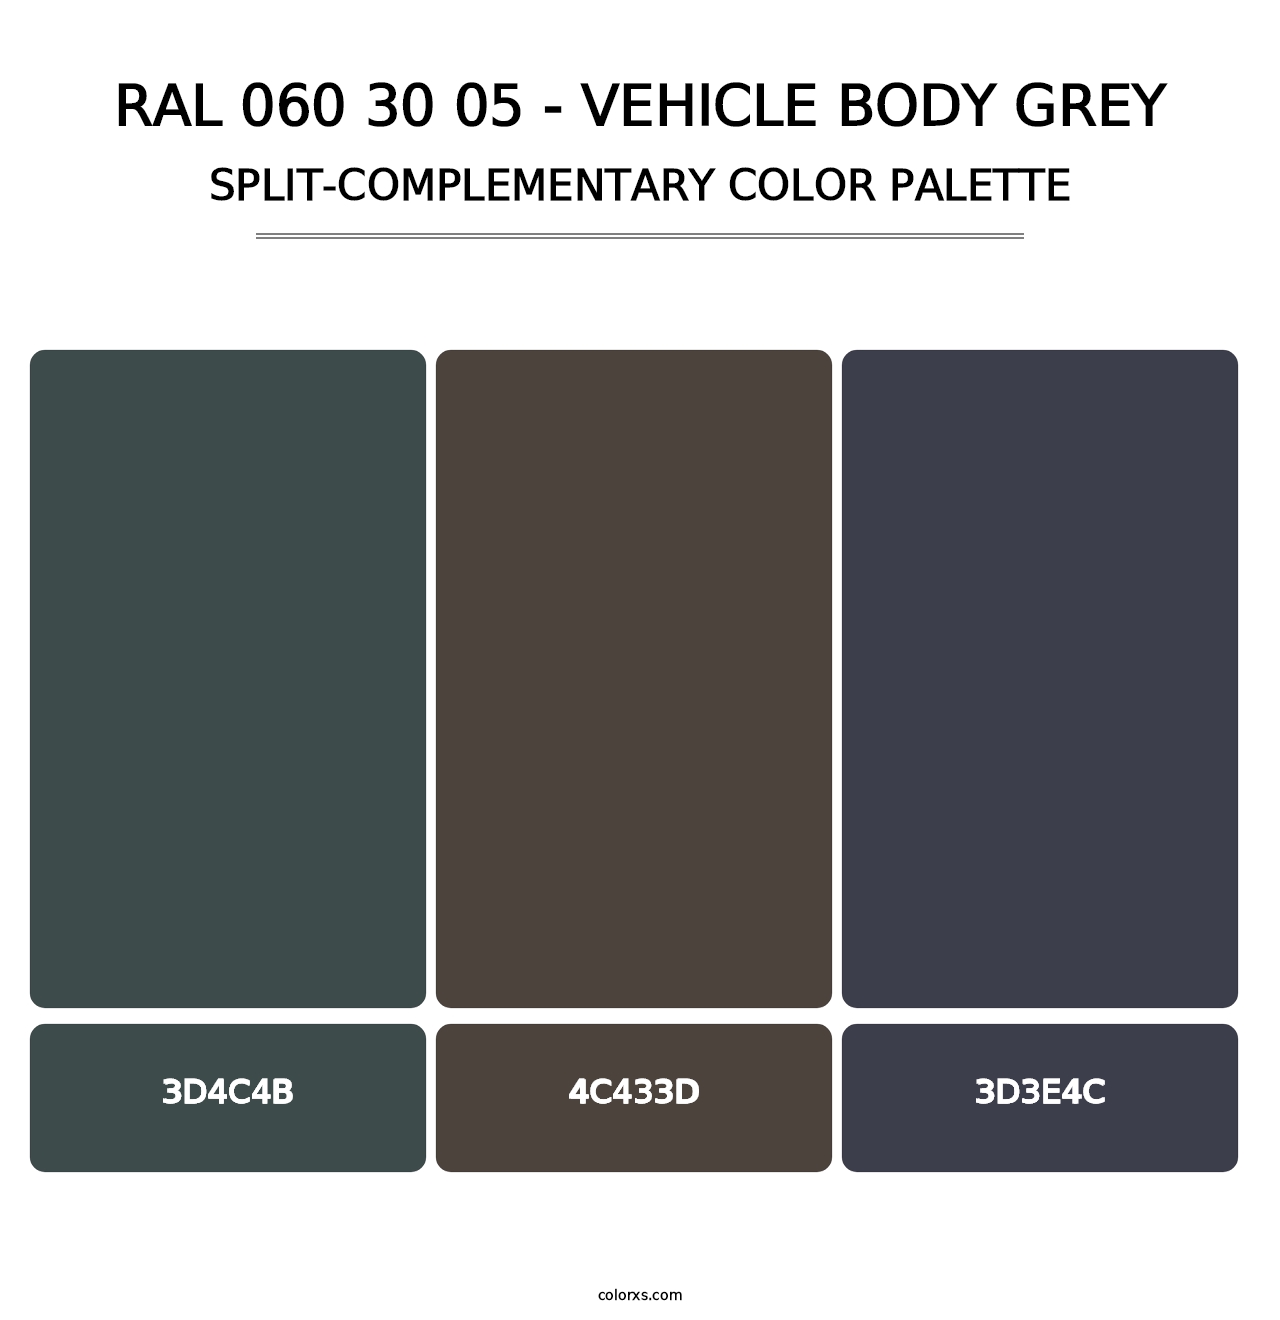 RAL 060 30 05 - Vehicle Body Grey - Split-Complementary Color Palette